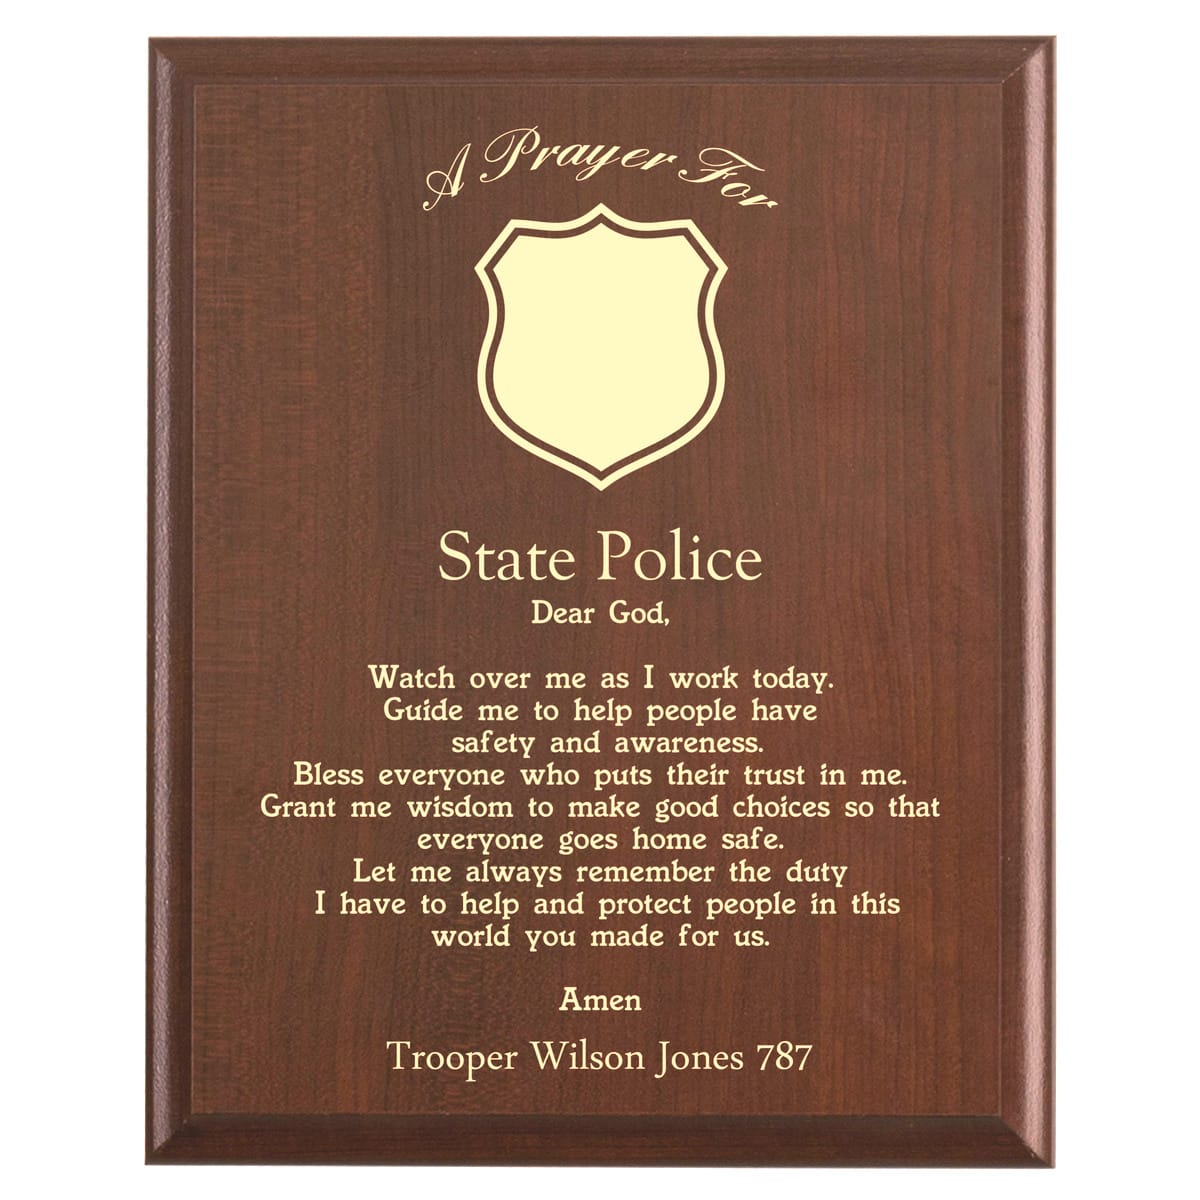 Plaque photo: State Police Prayer Plaque design with free personalization. Wood style finish with customized text.